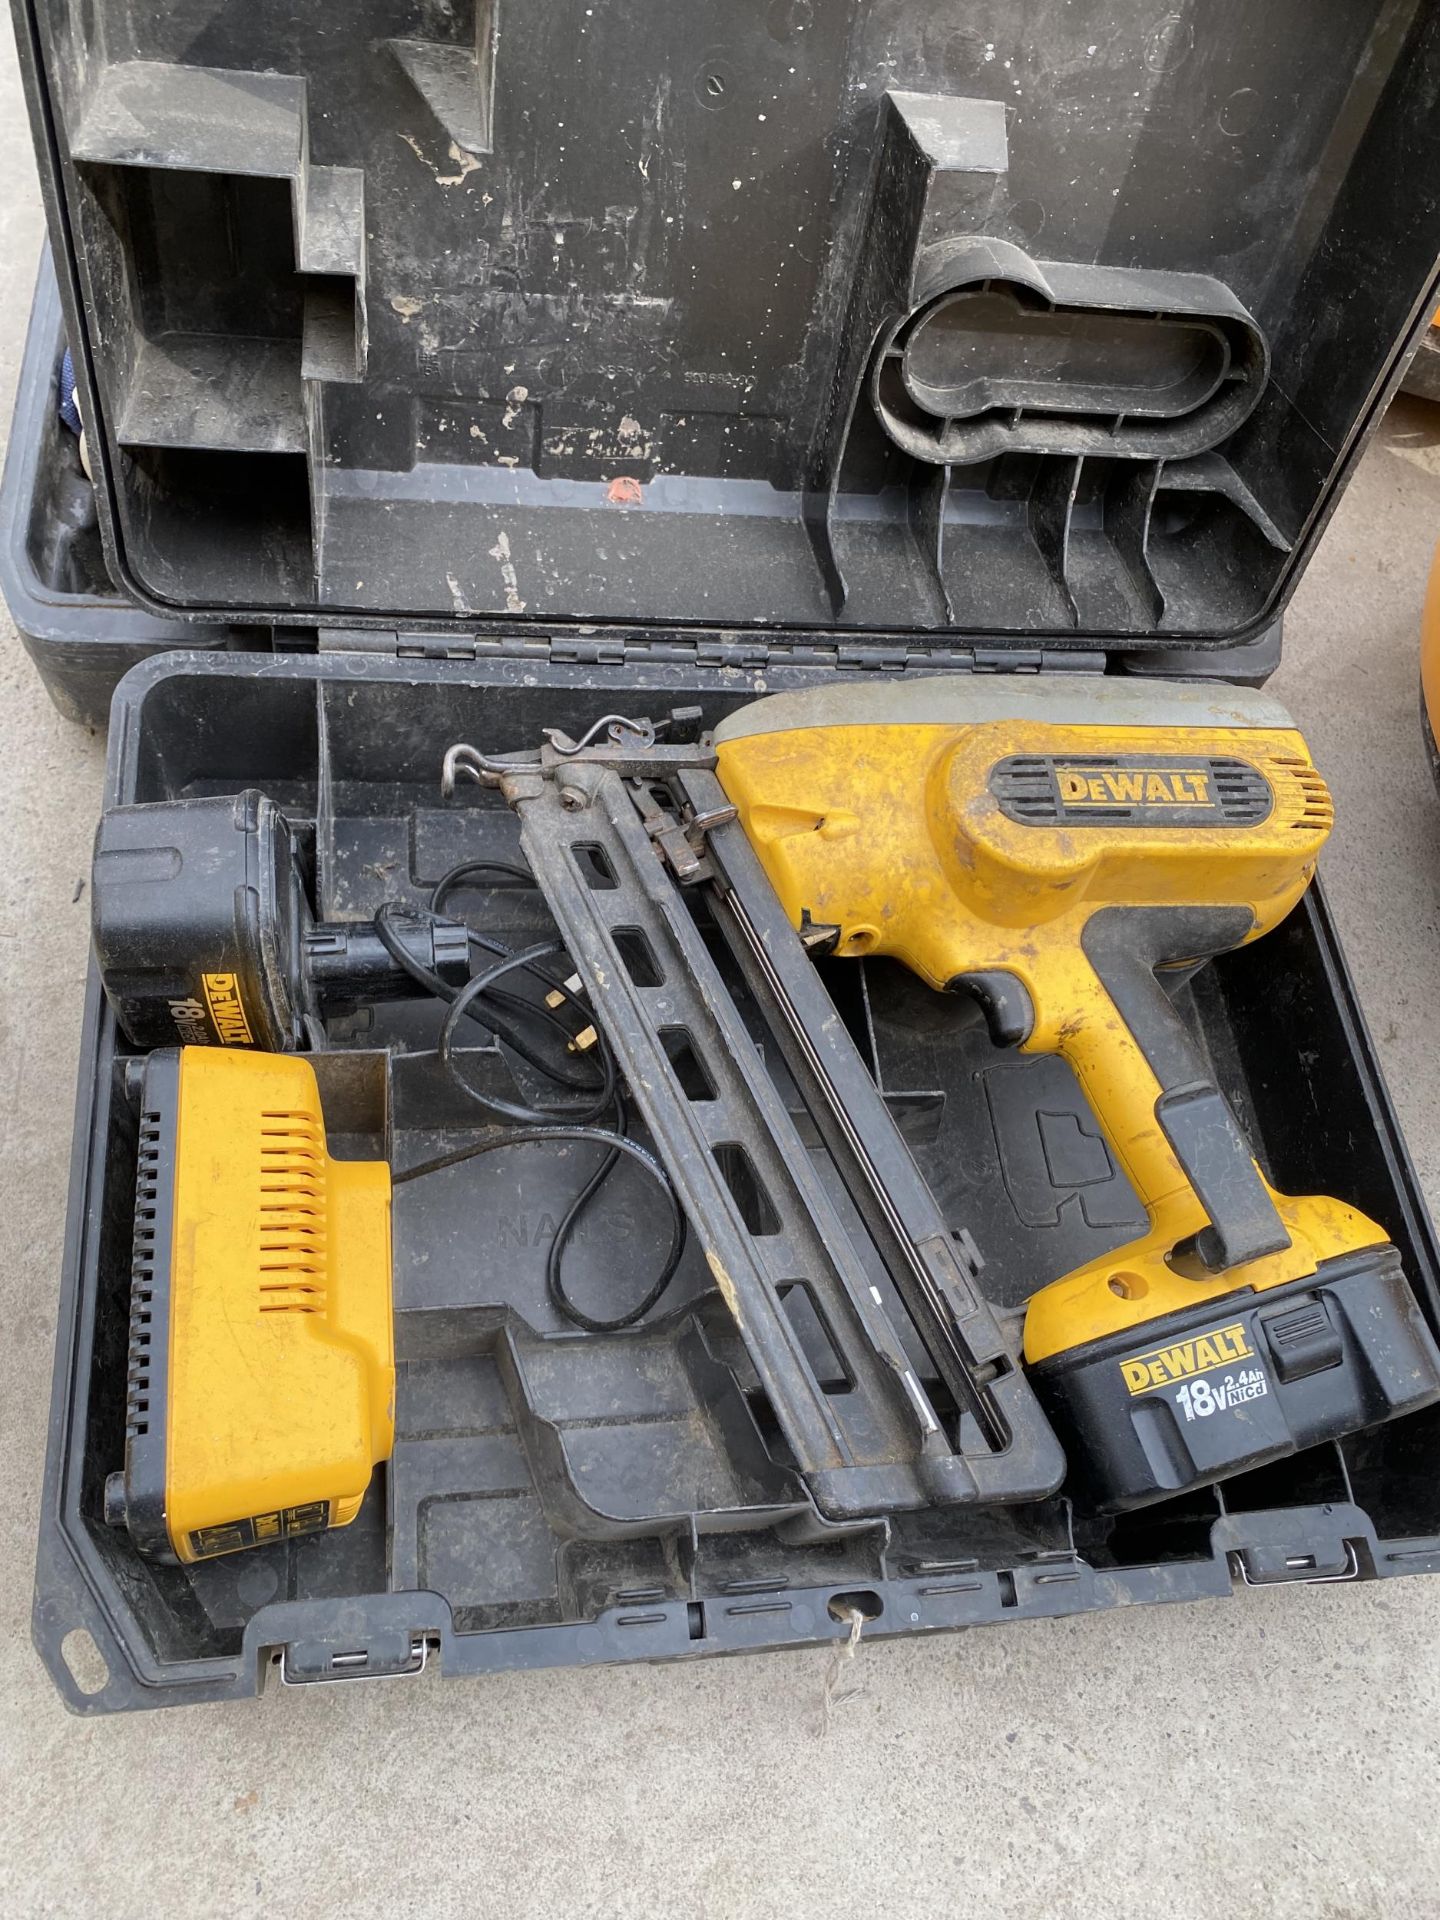 A DEWALT BATTERY POWERED NAIL GUN AND AN EVOLUTION MAG DRILL - Image 2 of 3